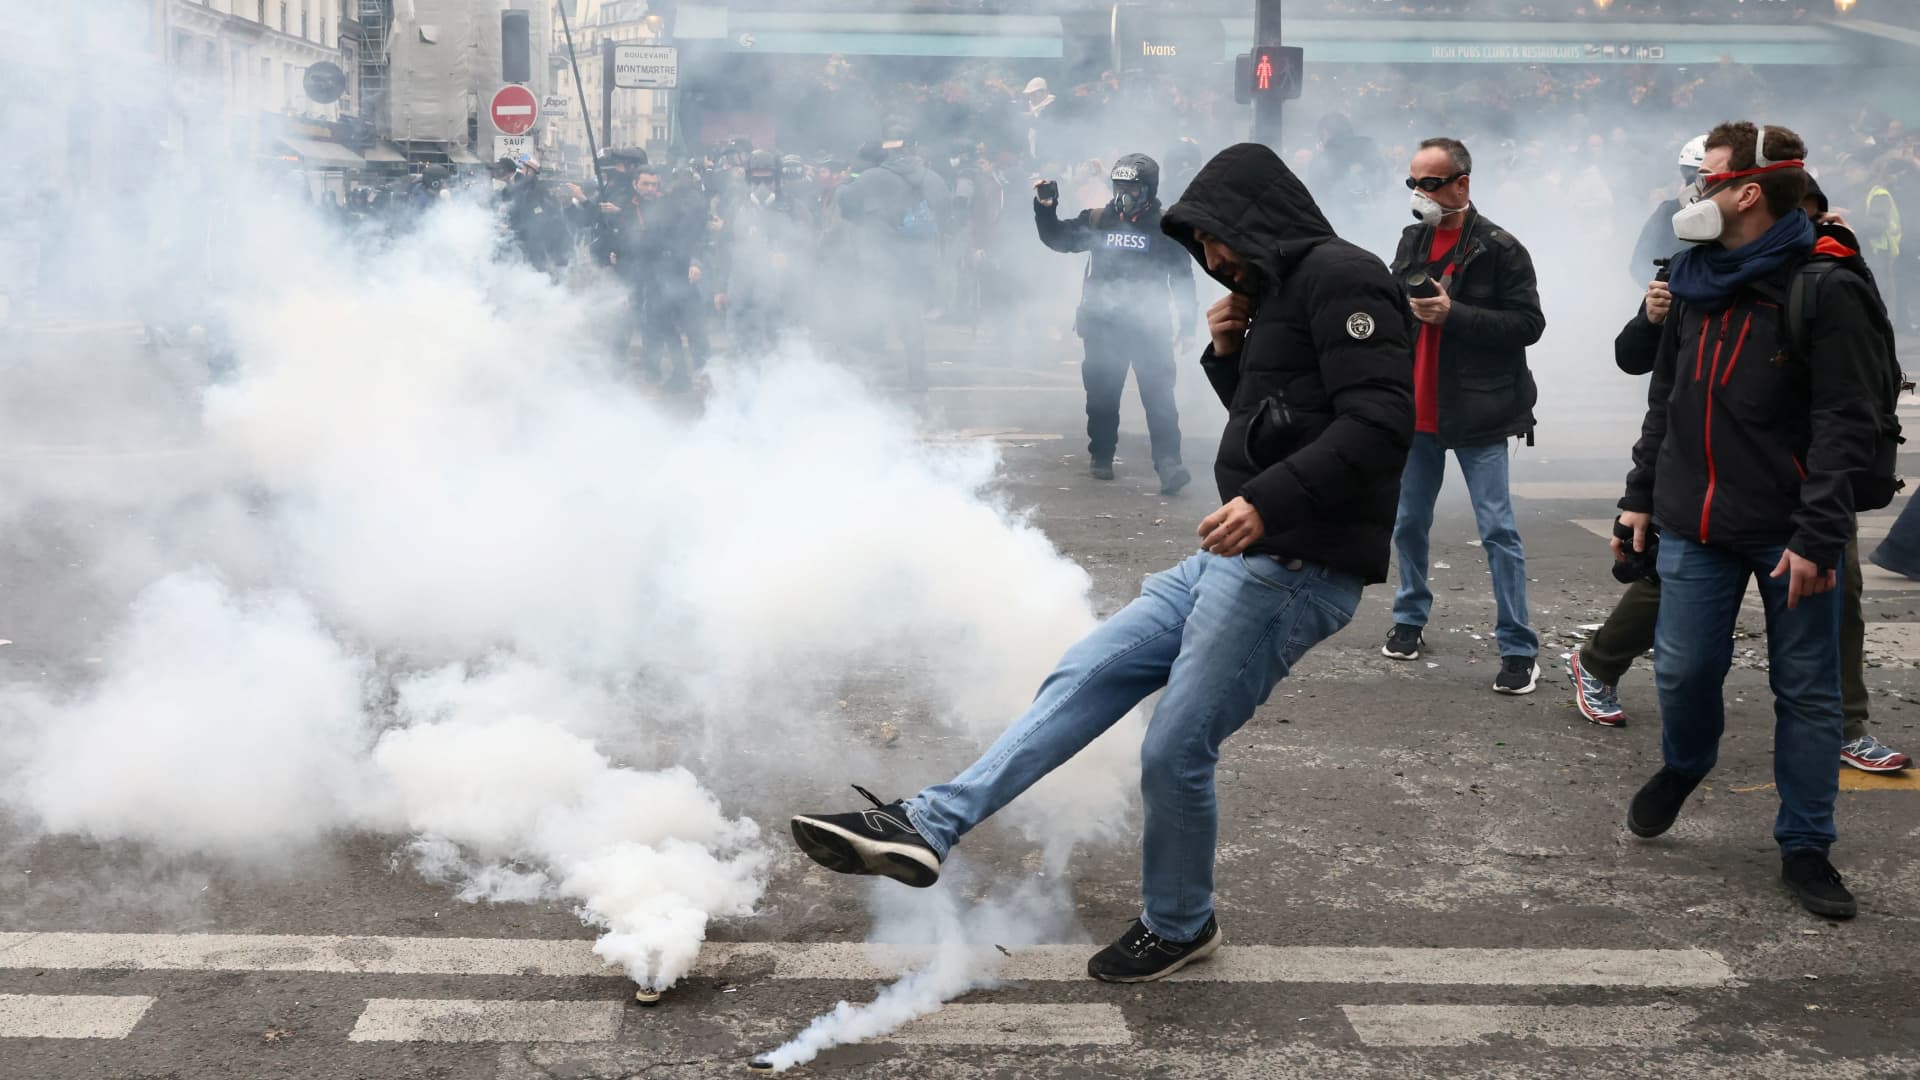 In pictures: Violent clashes in Paris after Macron forces through pension changes